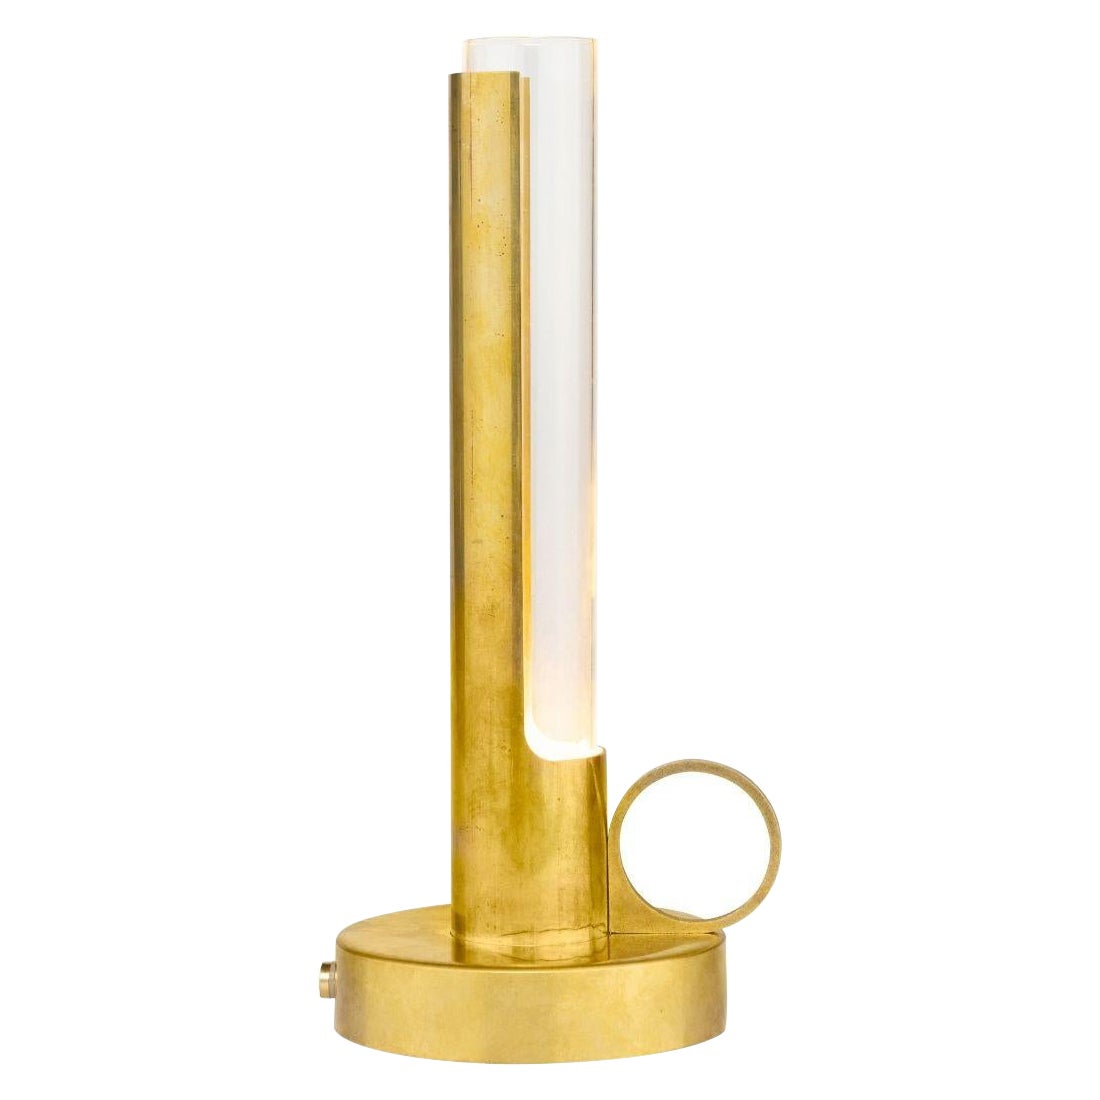 Pierre Sindre 'Visir' Portable Brass and Glass Table Lamp for Örsjö For Sale